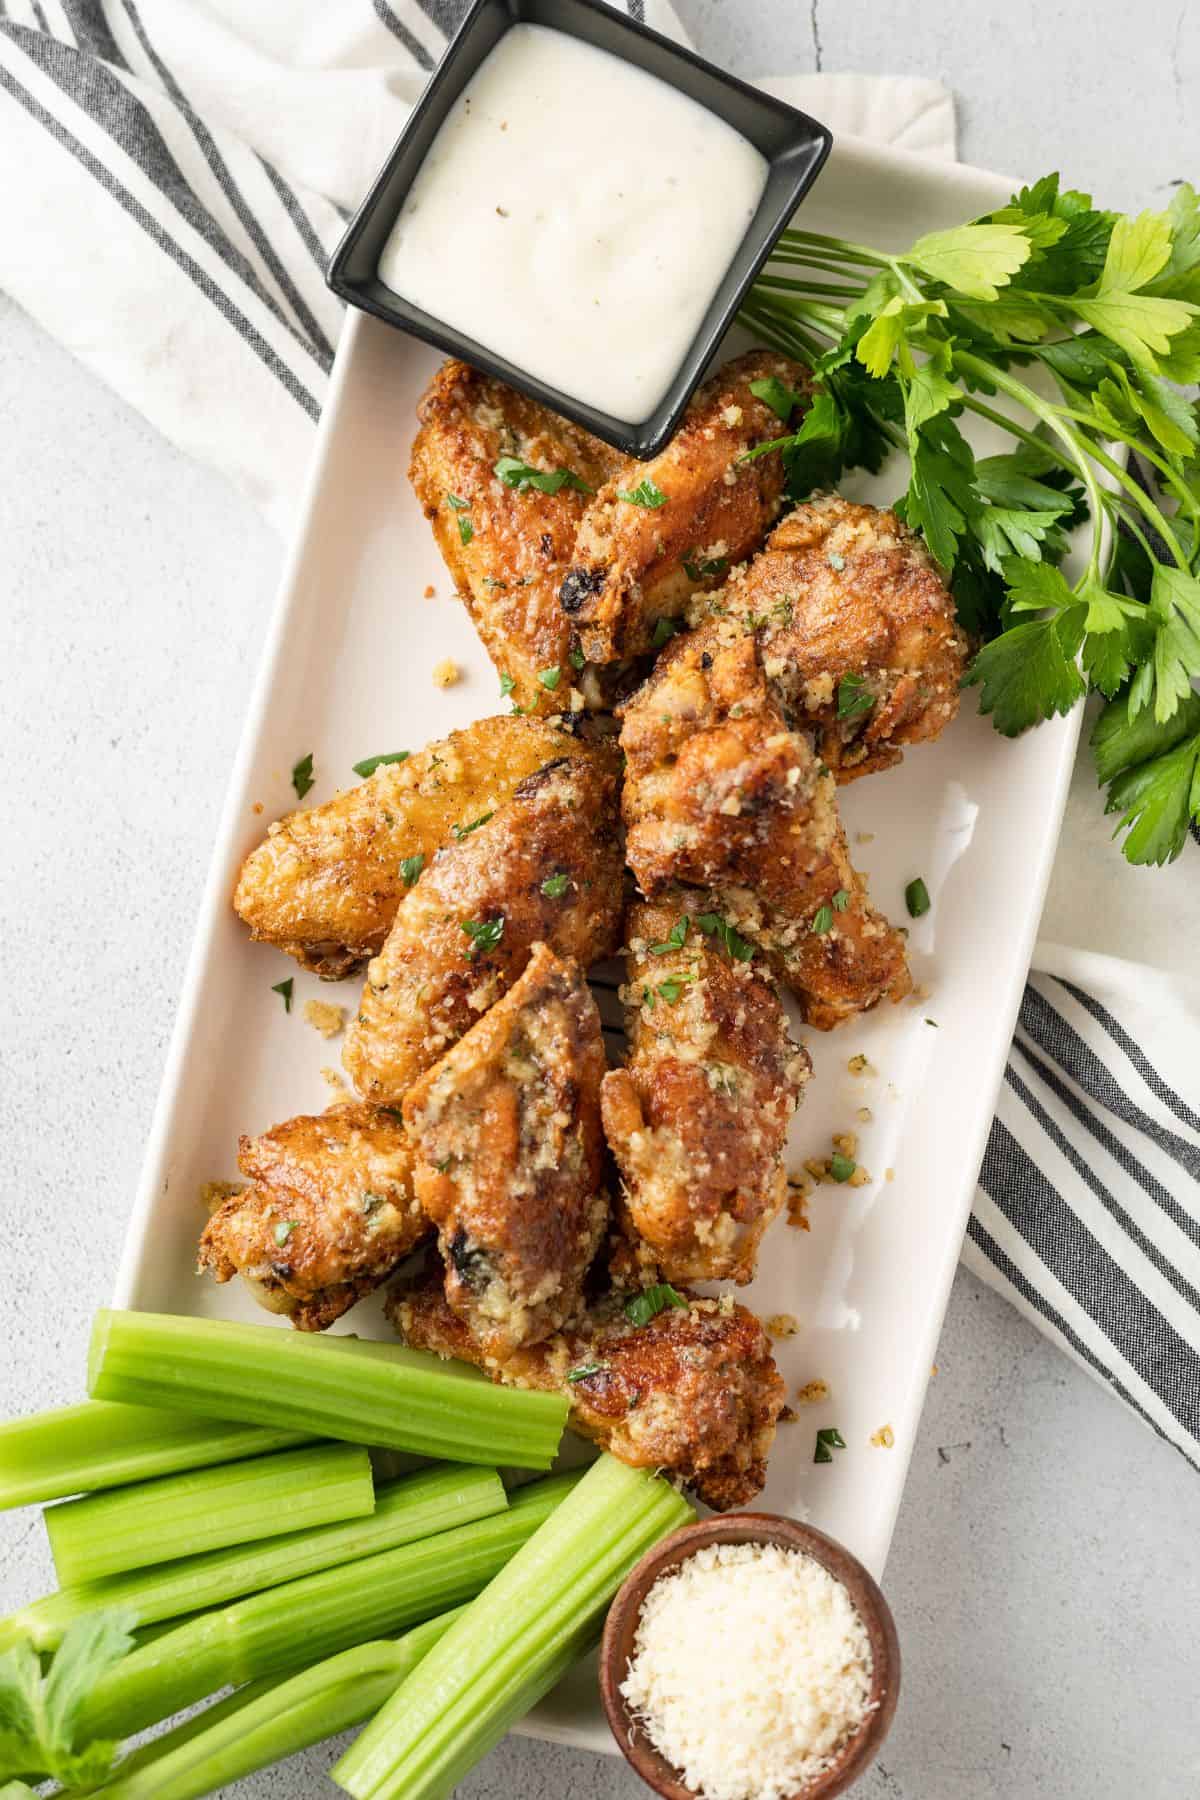 Baked Garlic Parmesan Wings on a rectangular plate with celery sticks, parsley, and parmesan cheese